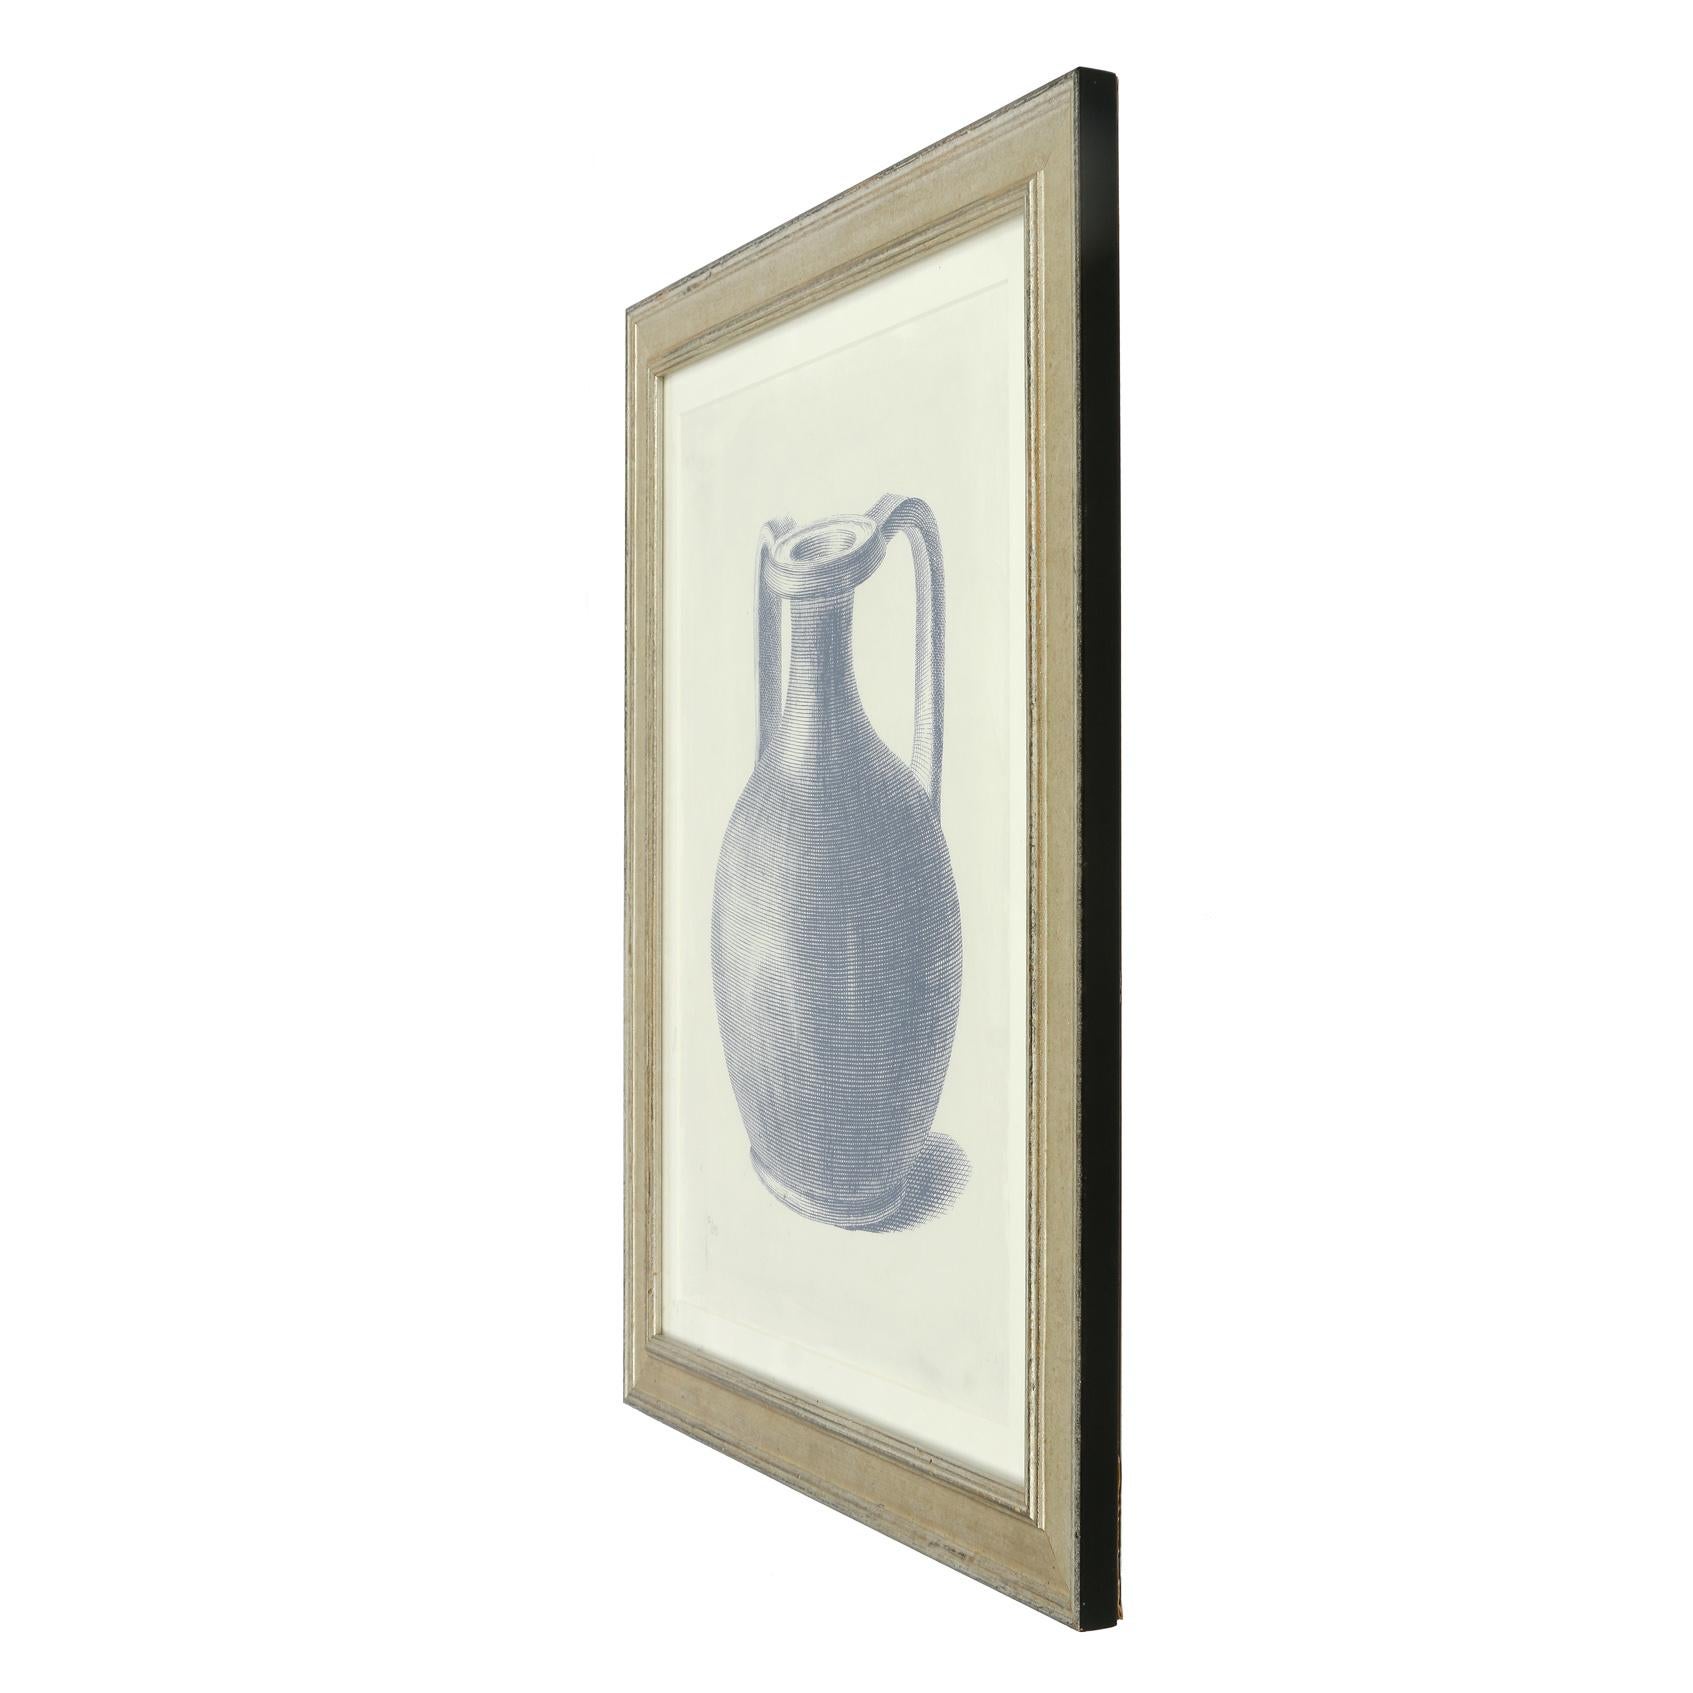 A pair of decorative numbered prints of urns in a beautiful indigo color in silvered wood frames.